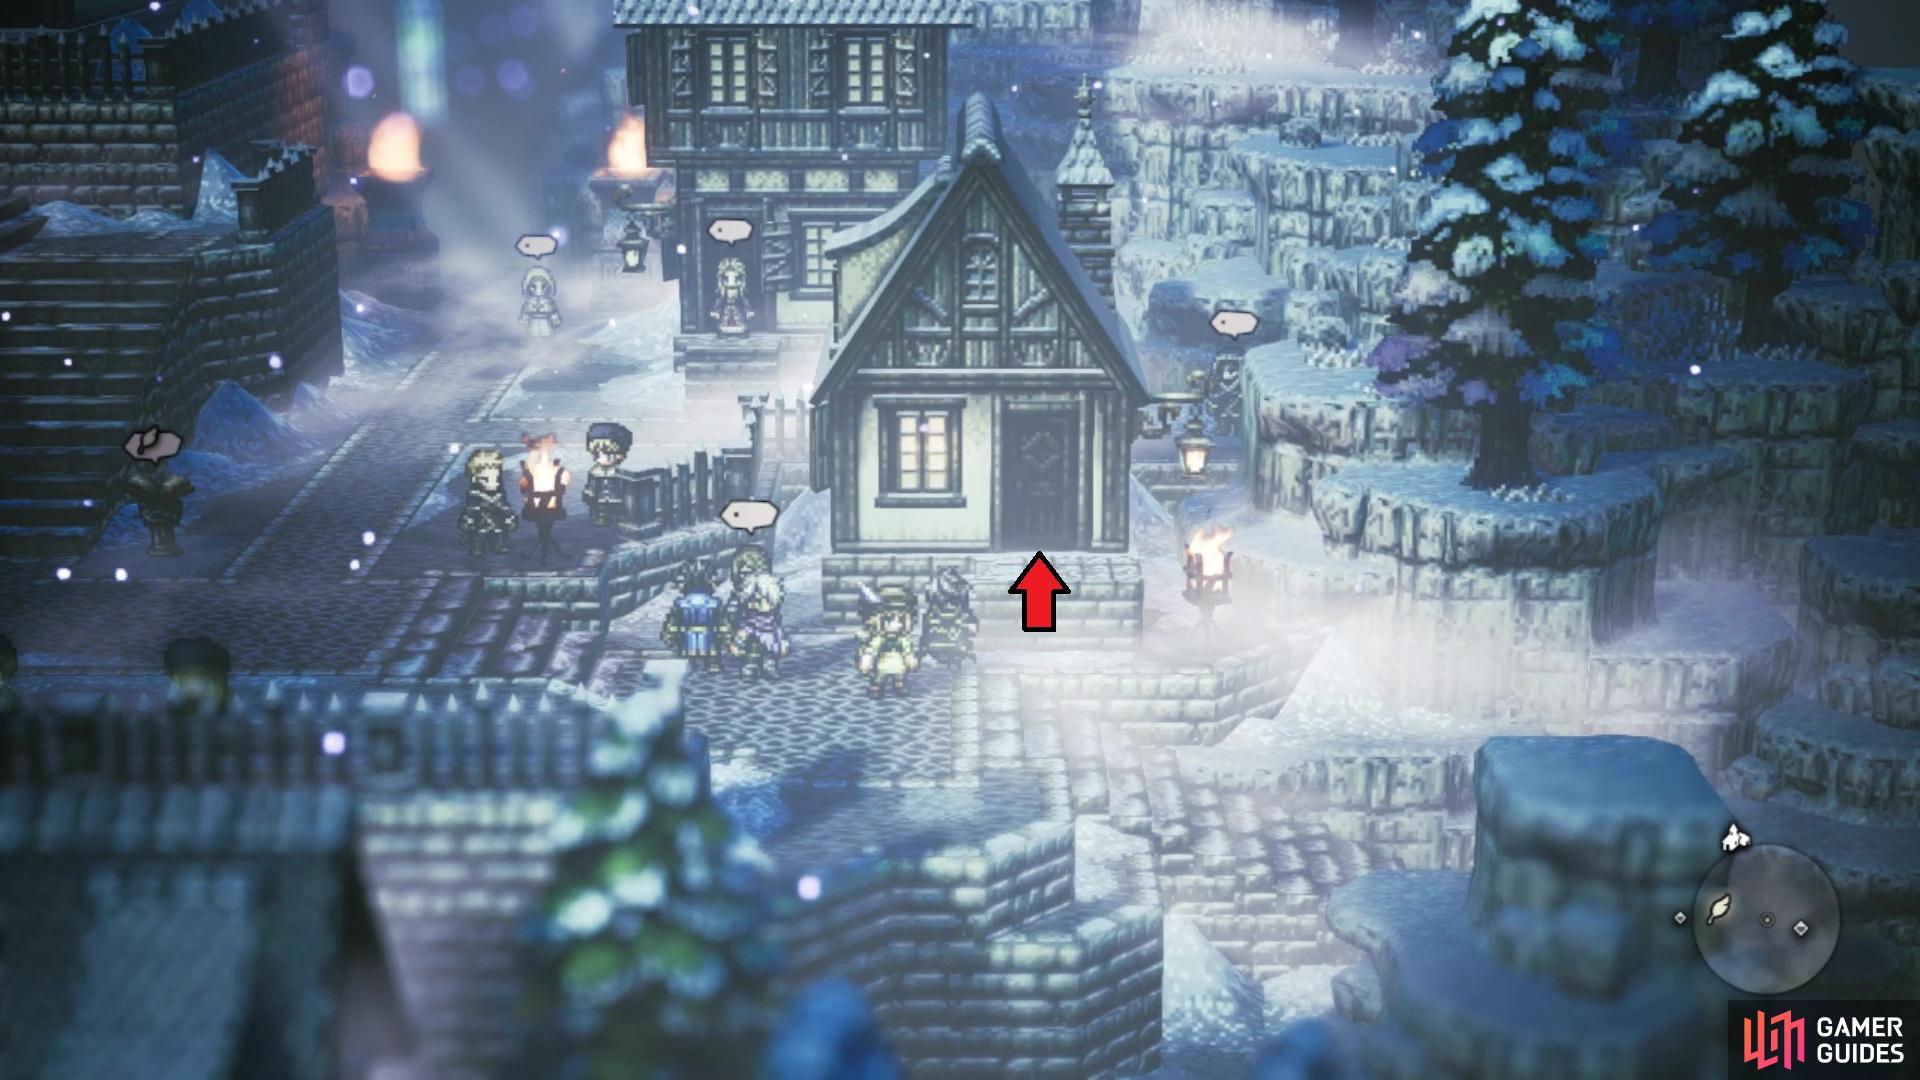 The Shivering Townsperson can be found inside of the pictured house